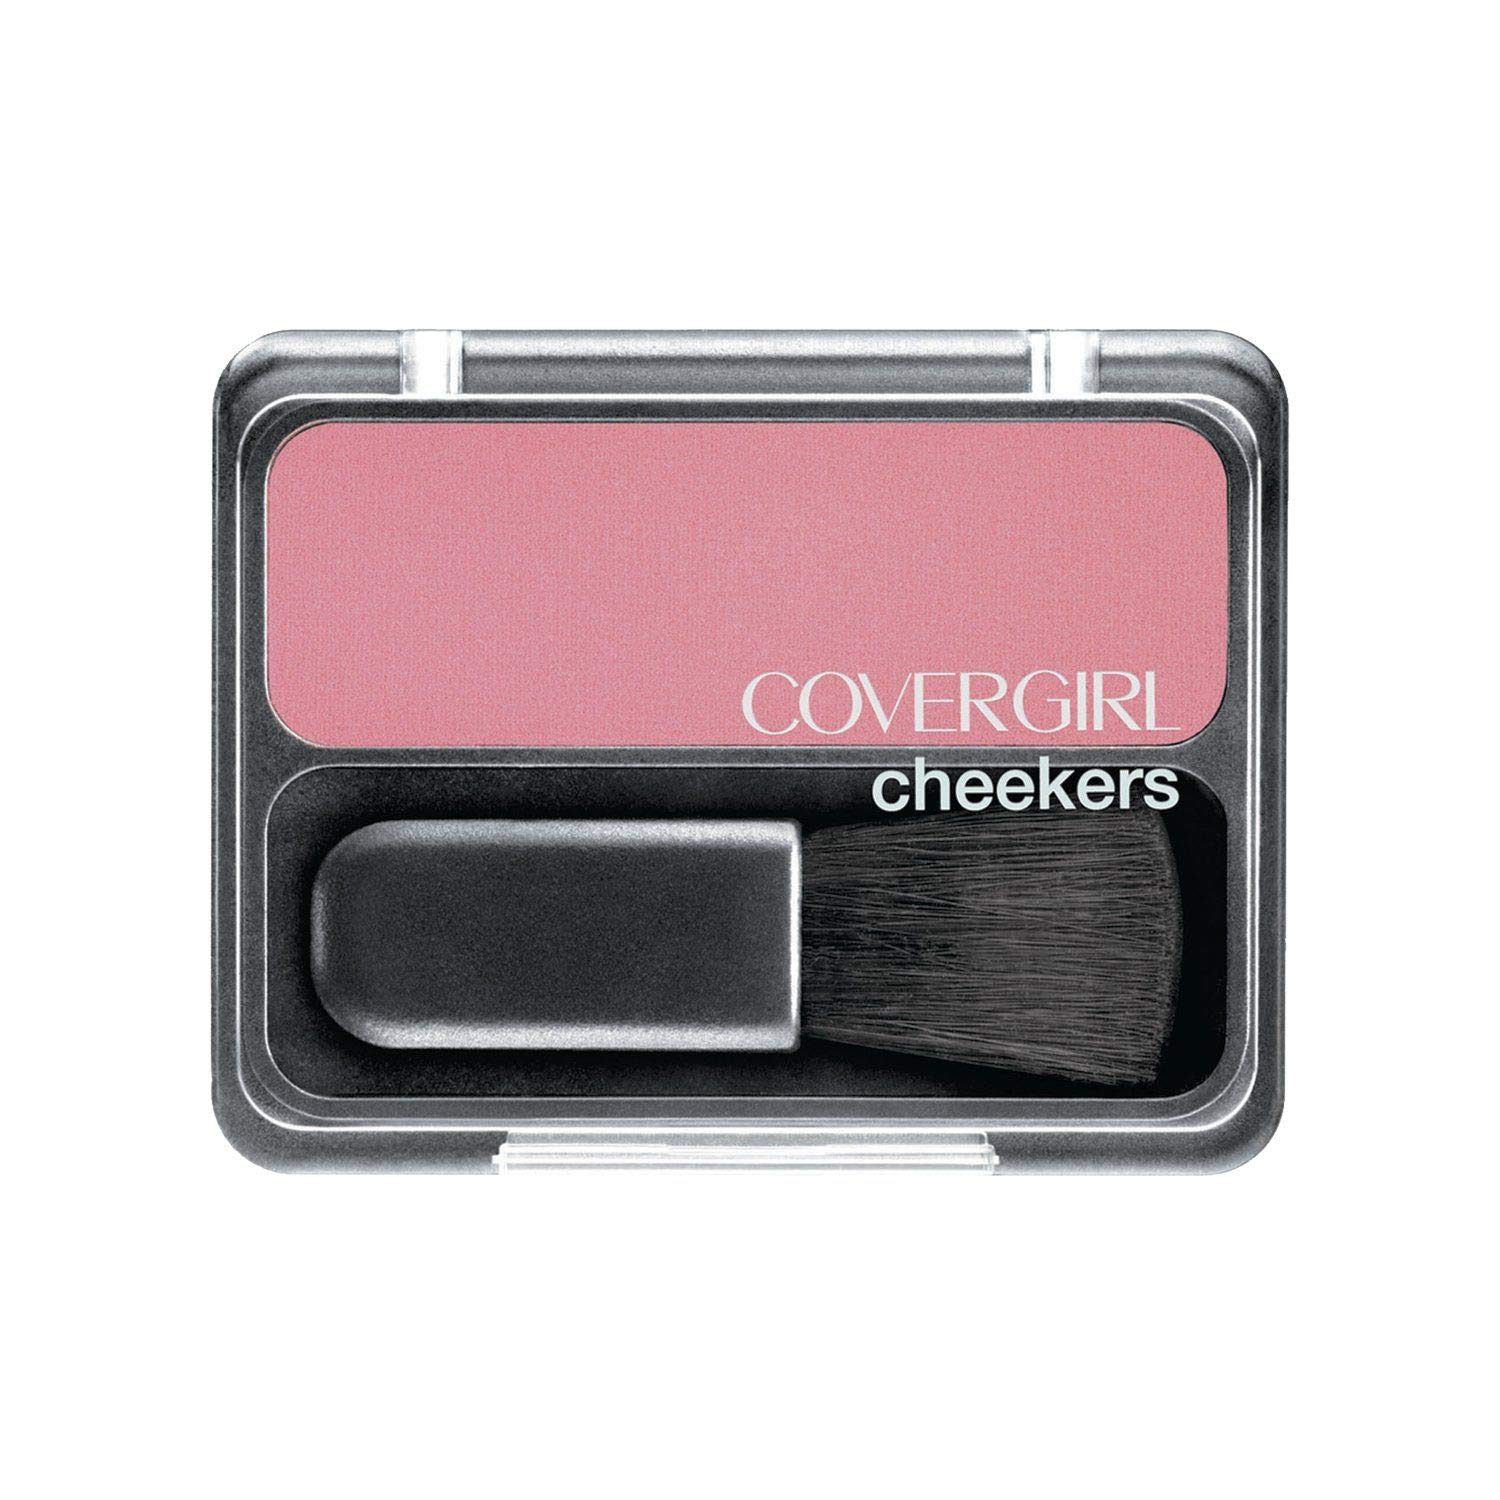 COVERGIRL Cheekers Blendable Powder Blush Rose Silk, .12 oz (packaging may vary), 1 Count